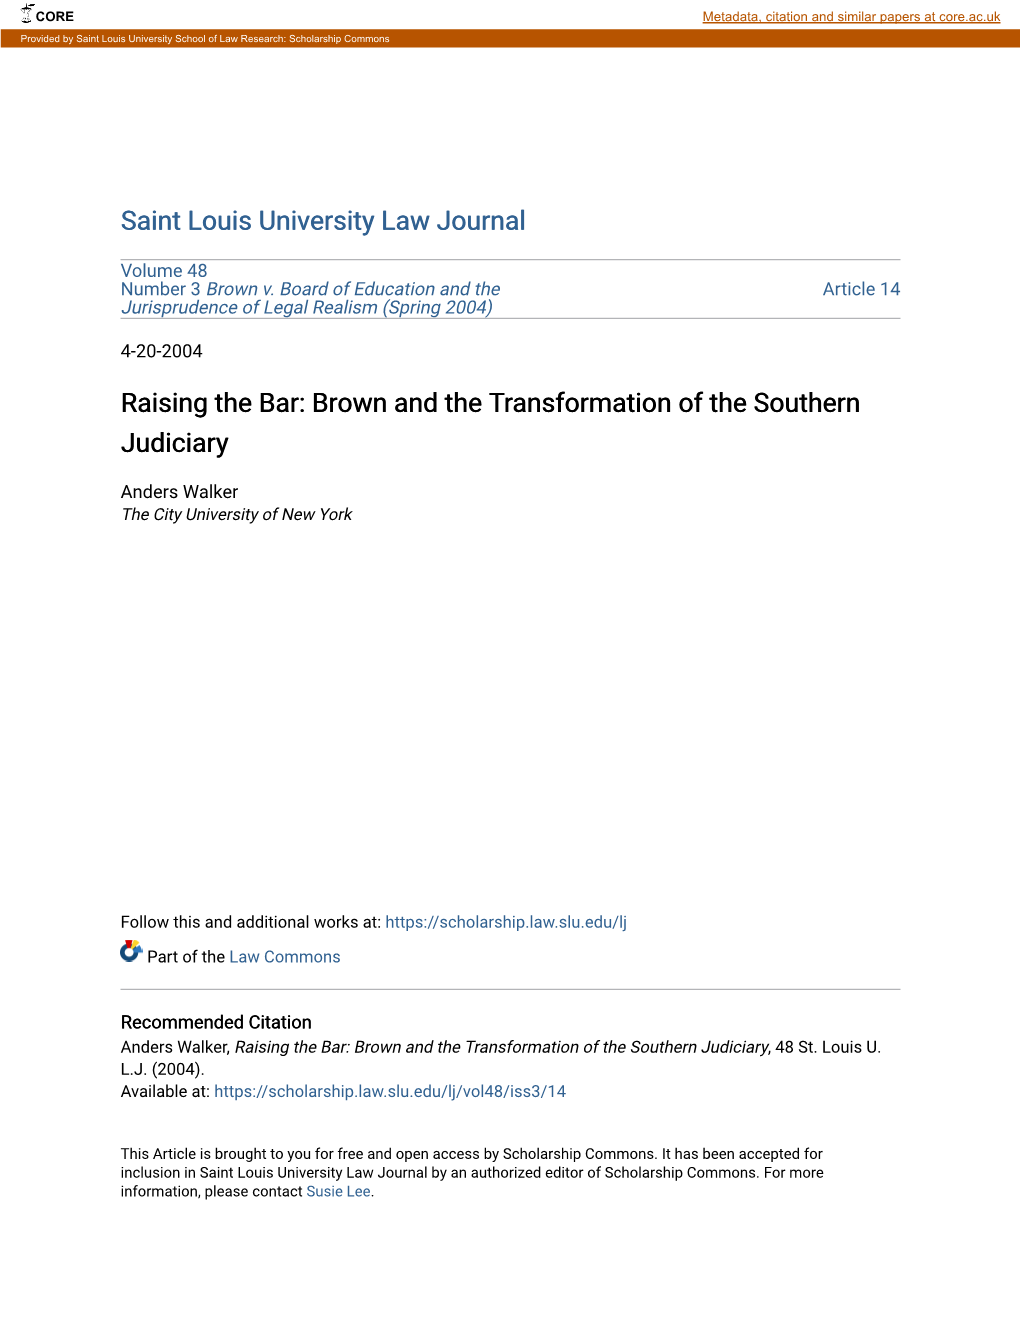 Raising the Bar: Brown and the Transformation of the Southern Judiciary